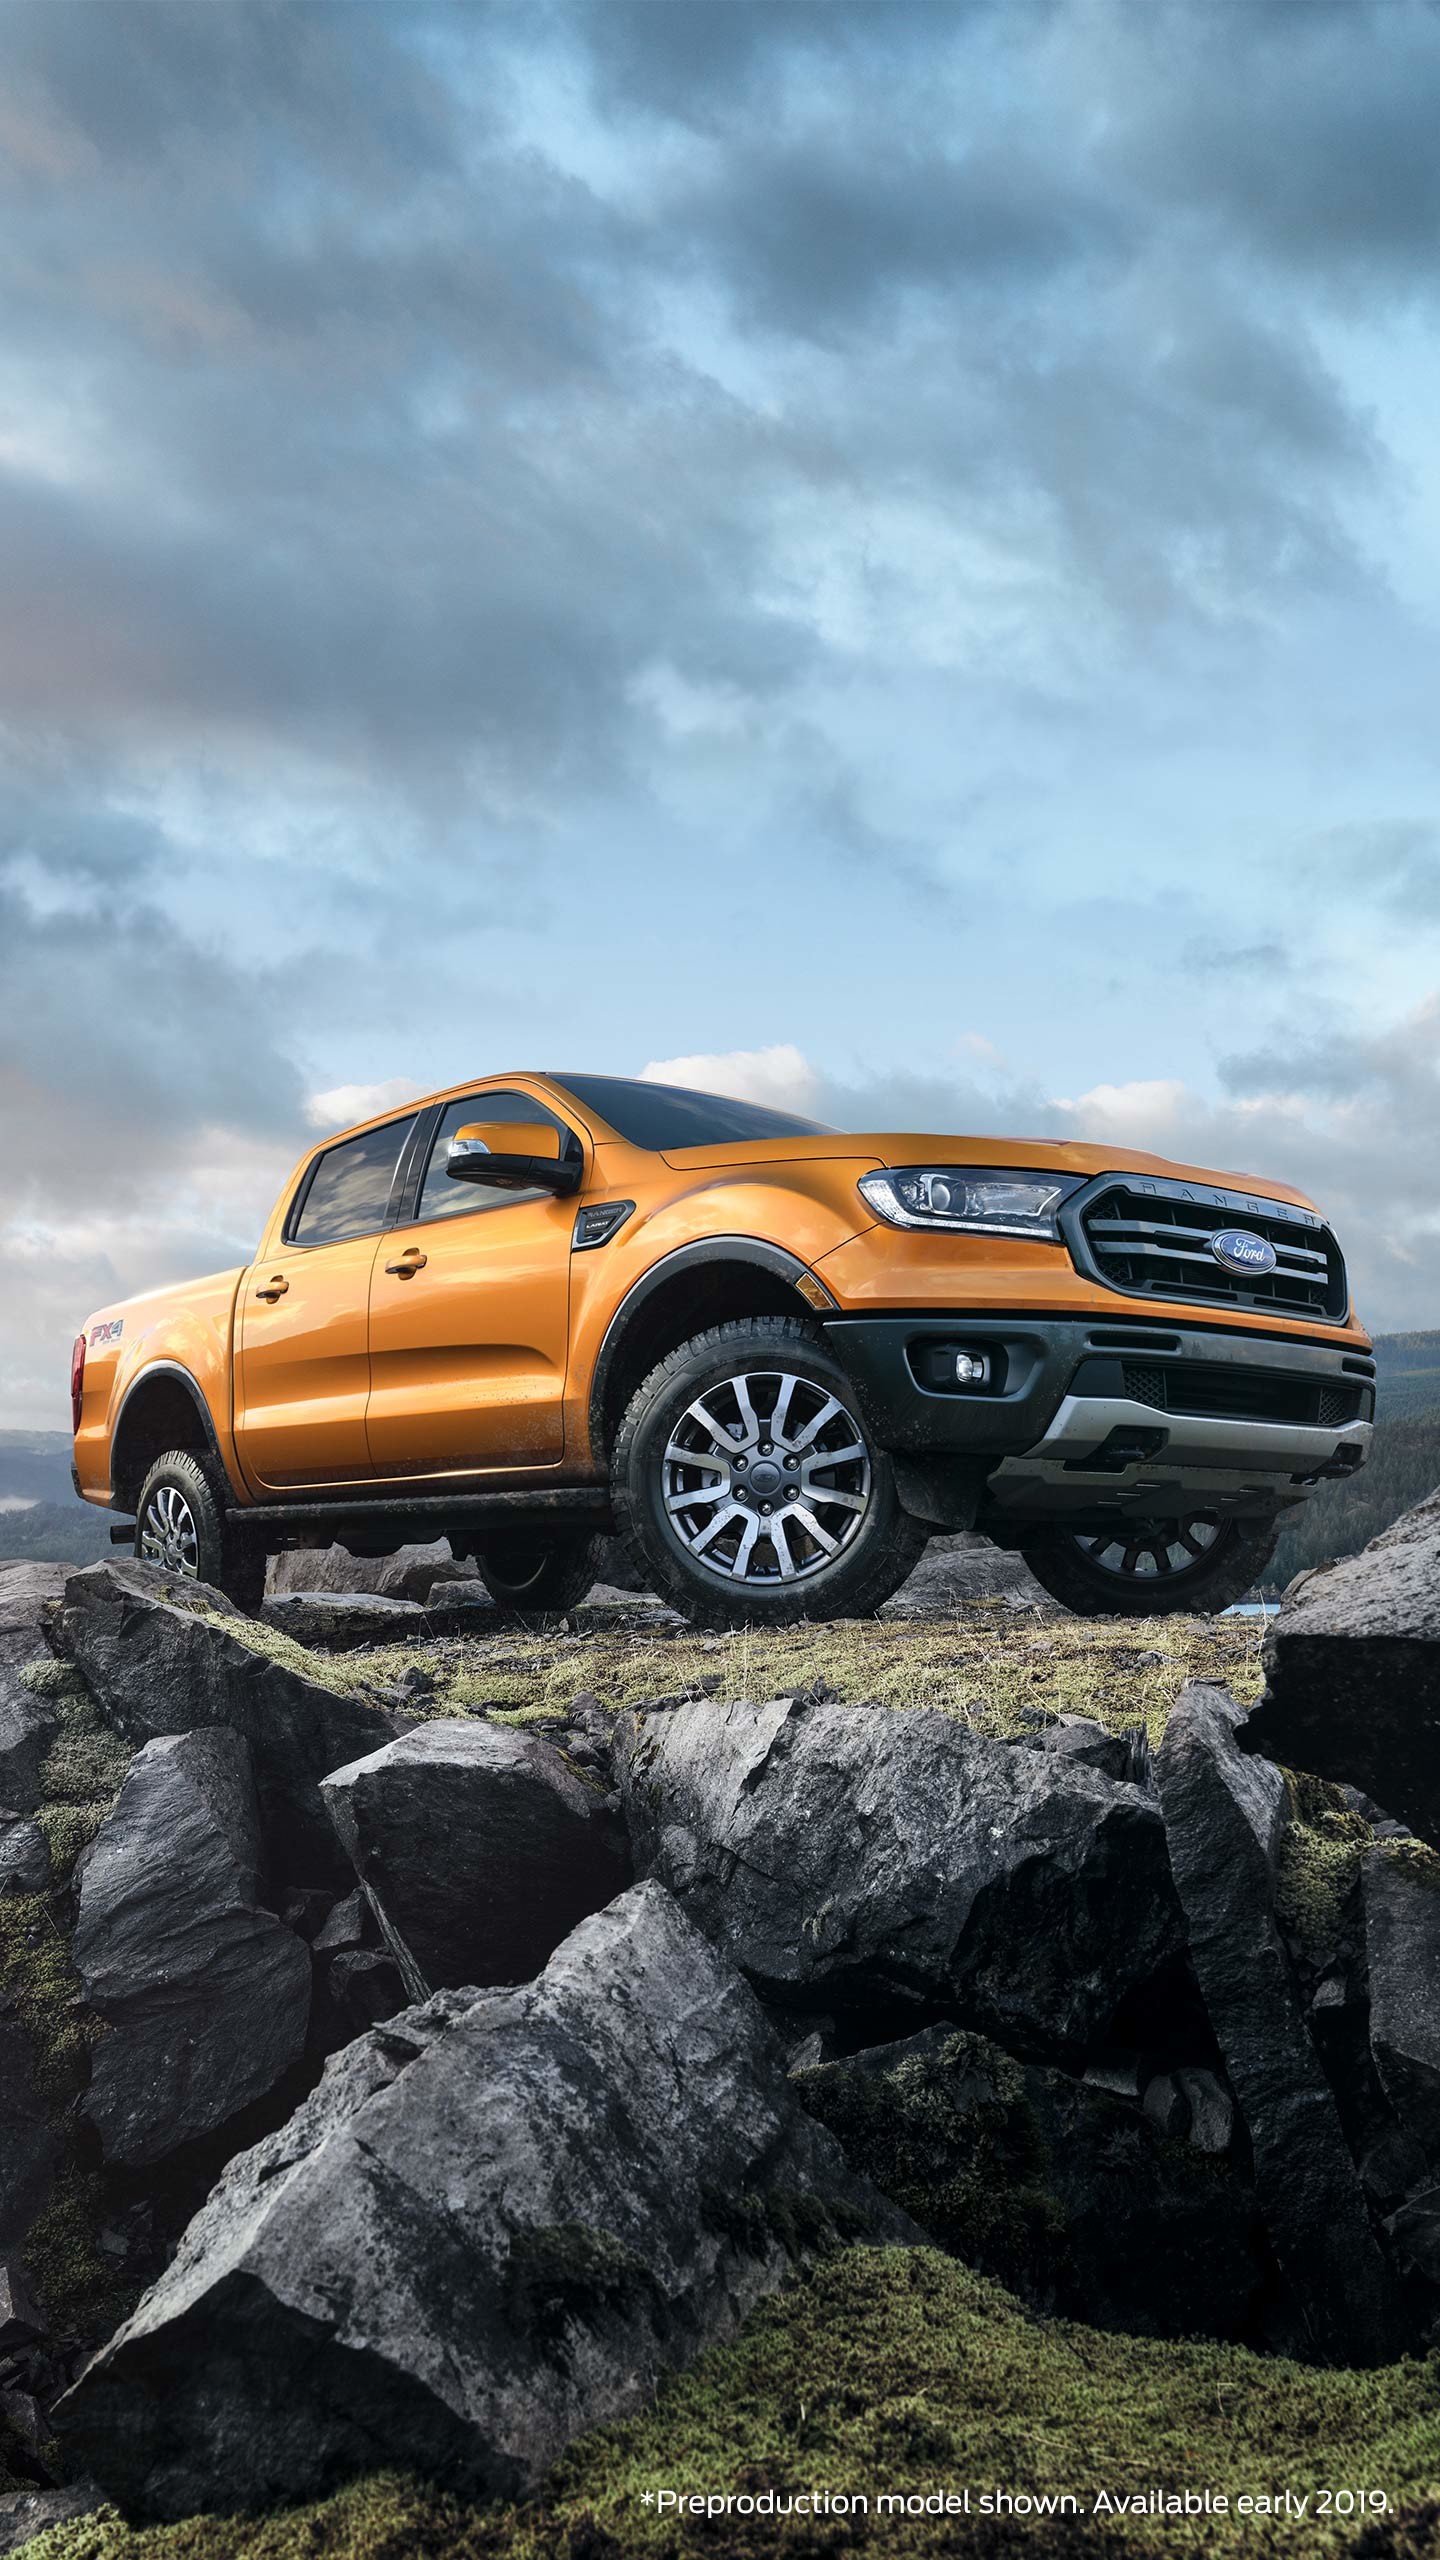 1440x2560 Make the 2019 Ford Ranger your wallpaper! Download the image below for ...